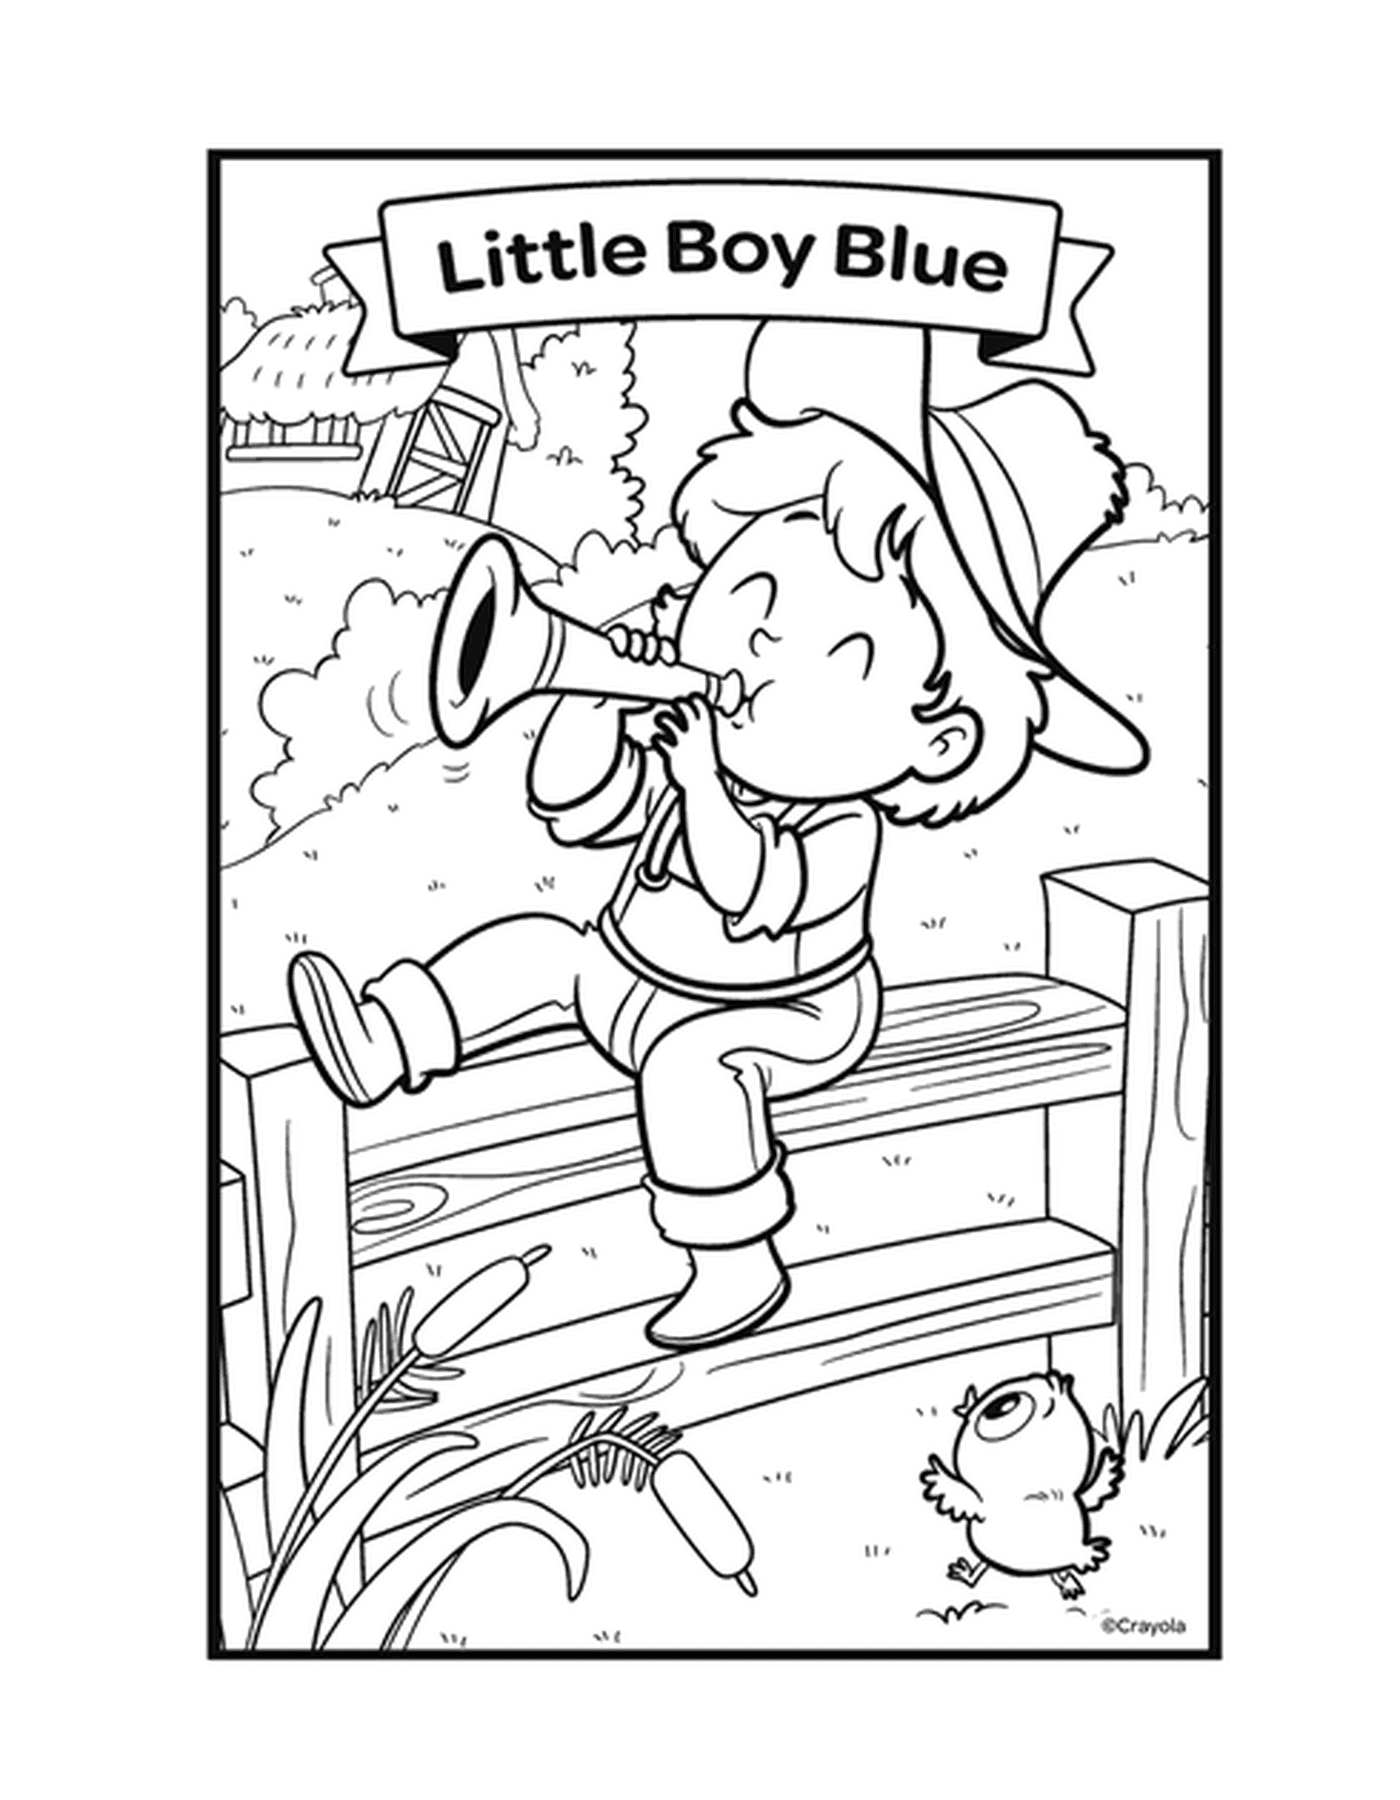  The rhyme The little blue boy with a boy playing trumpet on a bench 